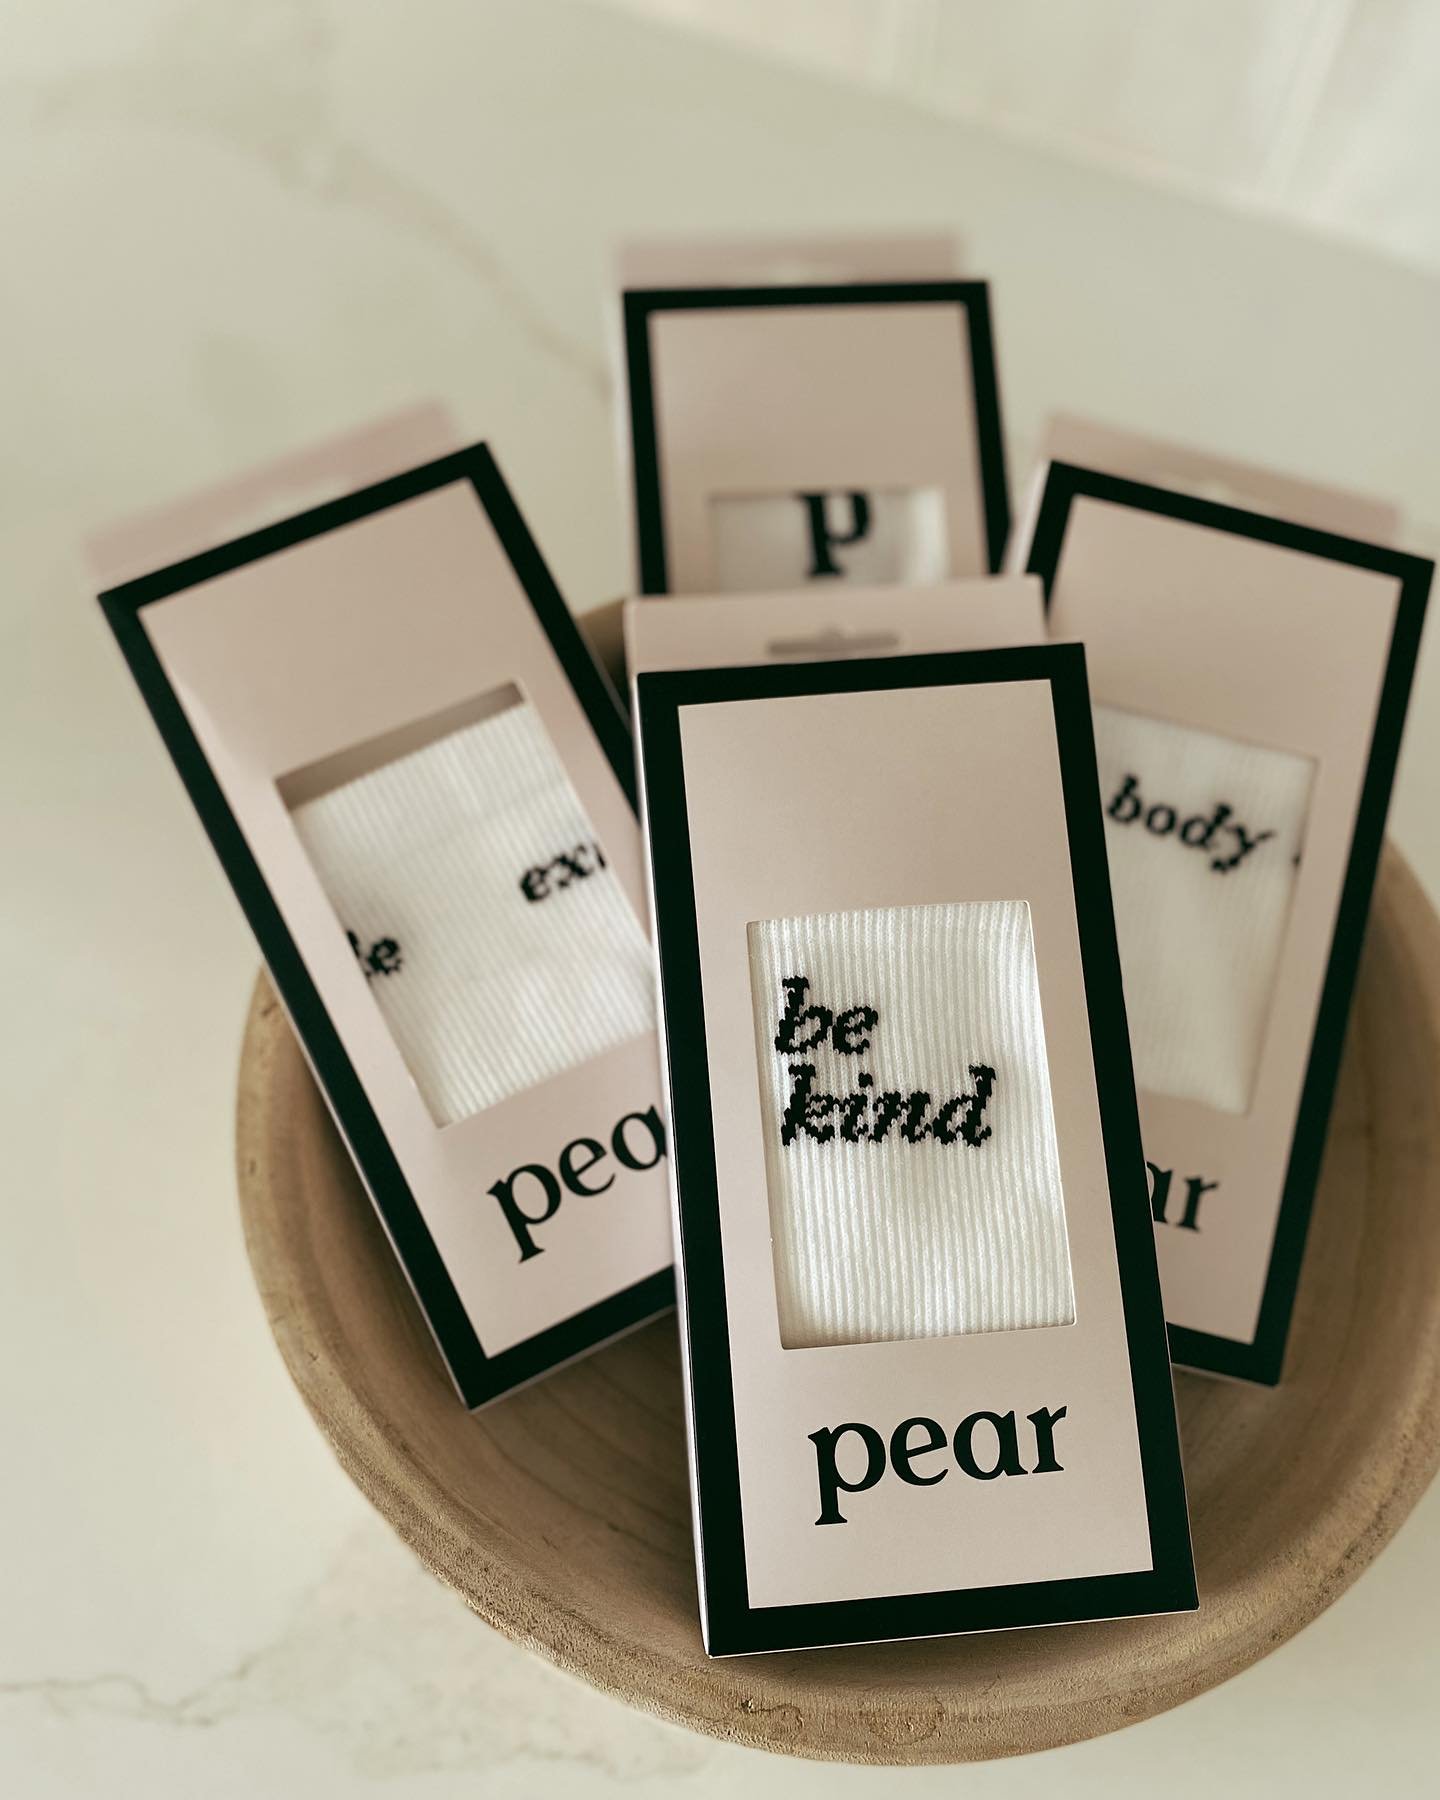 Sock drop ✨

Brand new in: @pearcompression socks, designed right here in Nova Scotia and meticulously crafted in Italy&mdash;these socks are your foots new BFF

The Grip Crew: Take your yoga and pages practice to the next level. The Pear athletic gr